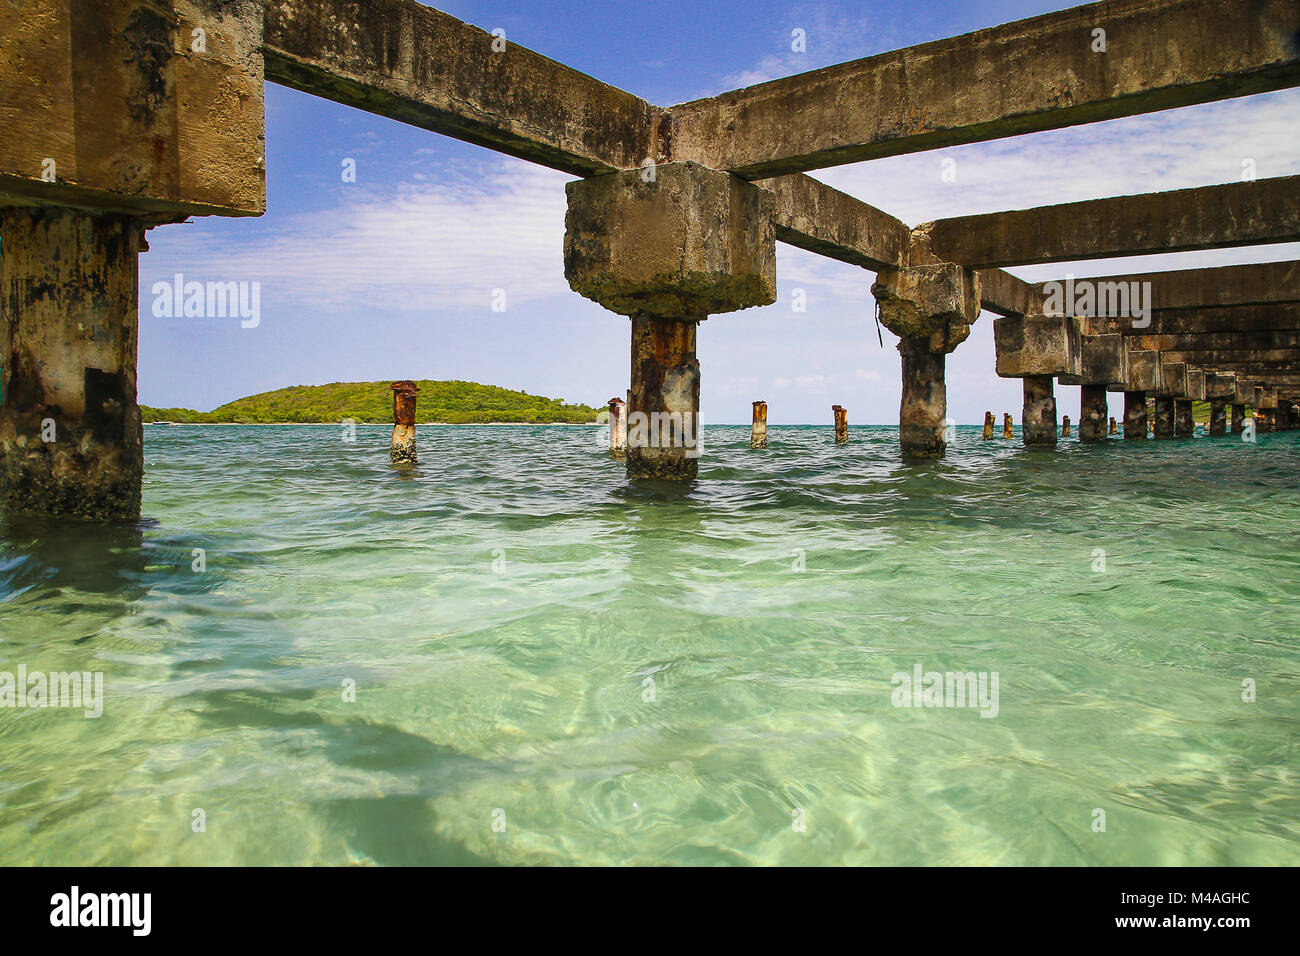 Vieques under the pier Stock Photo